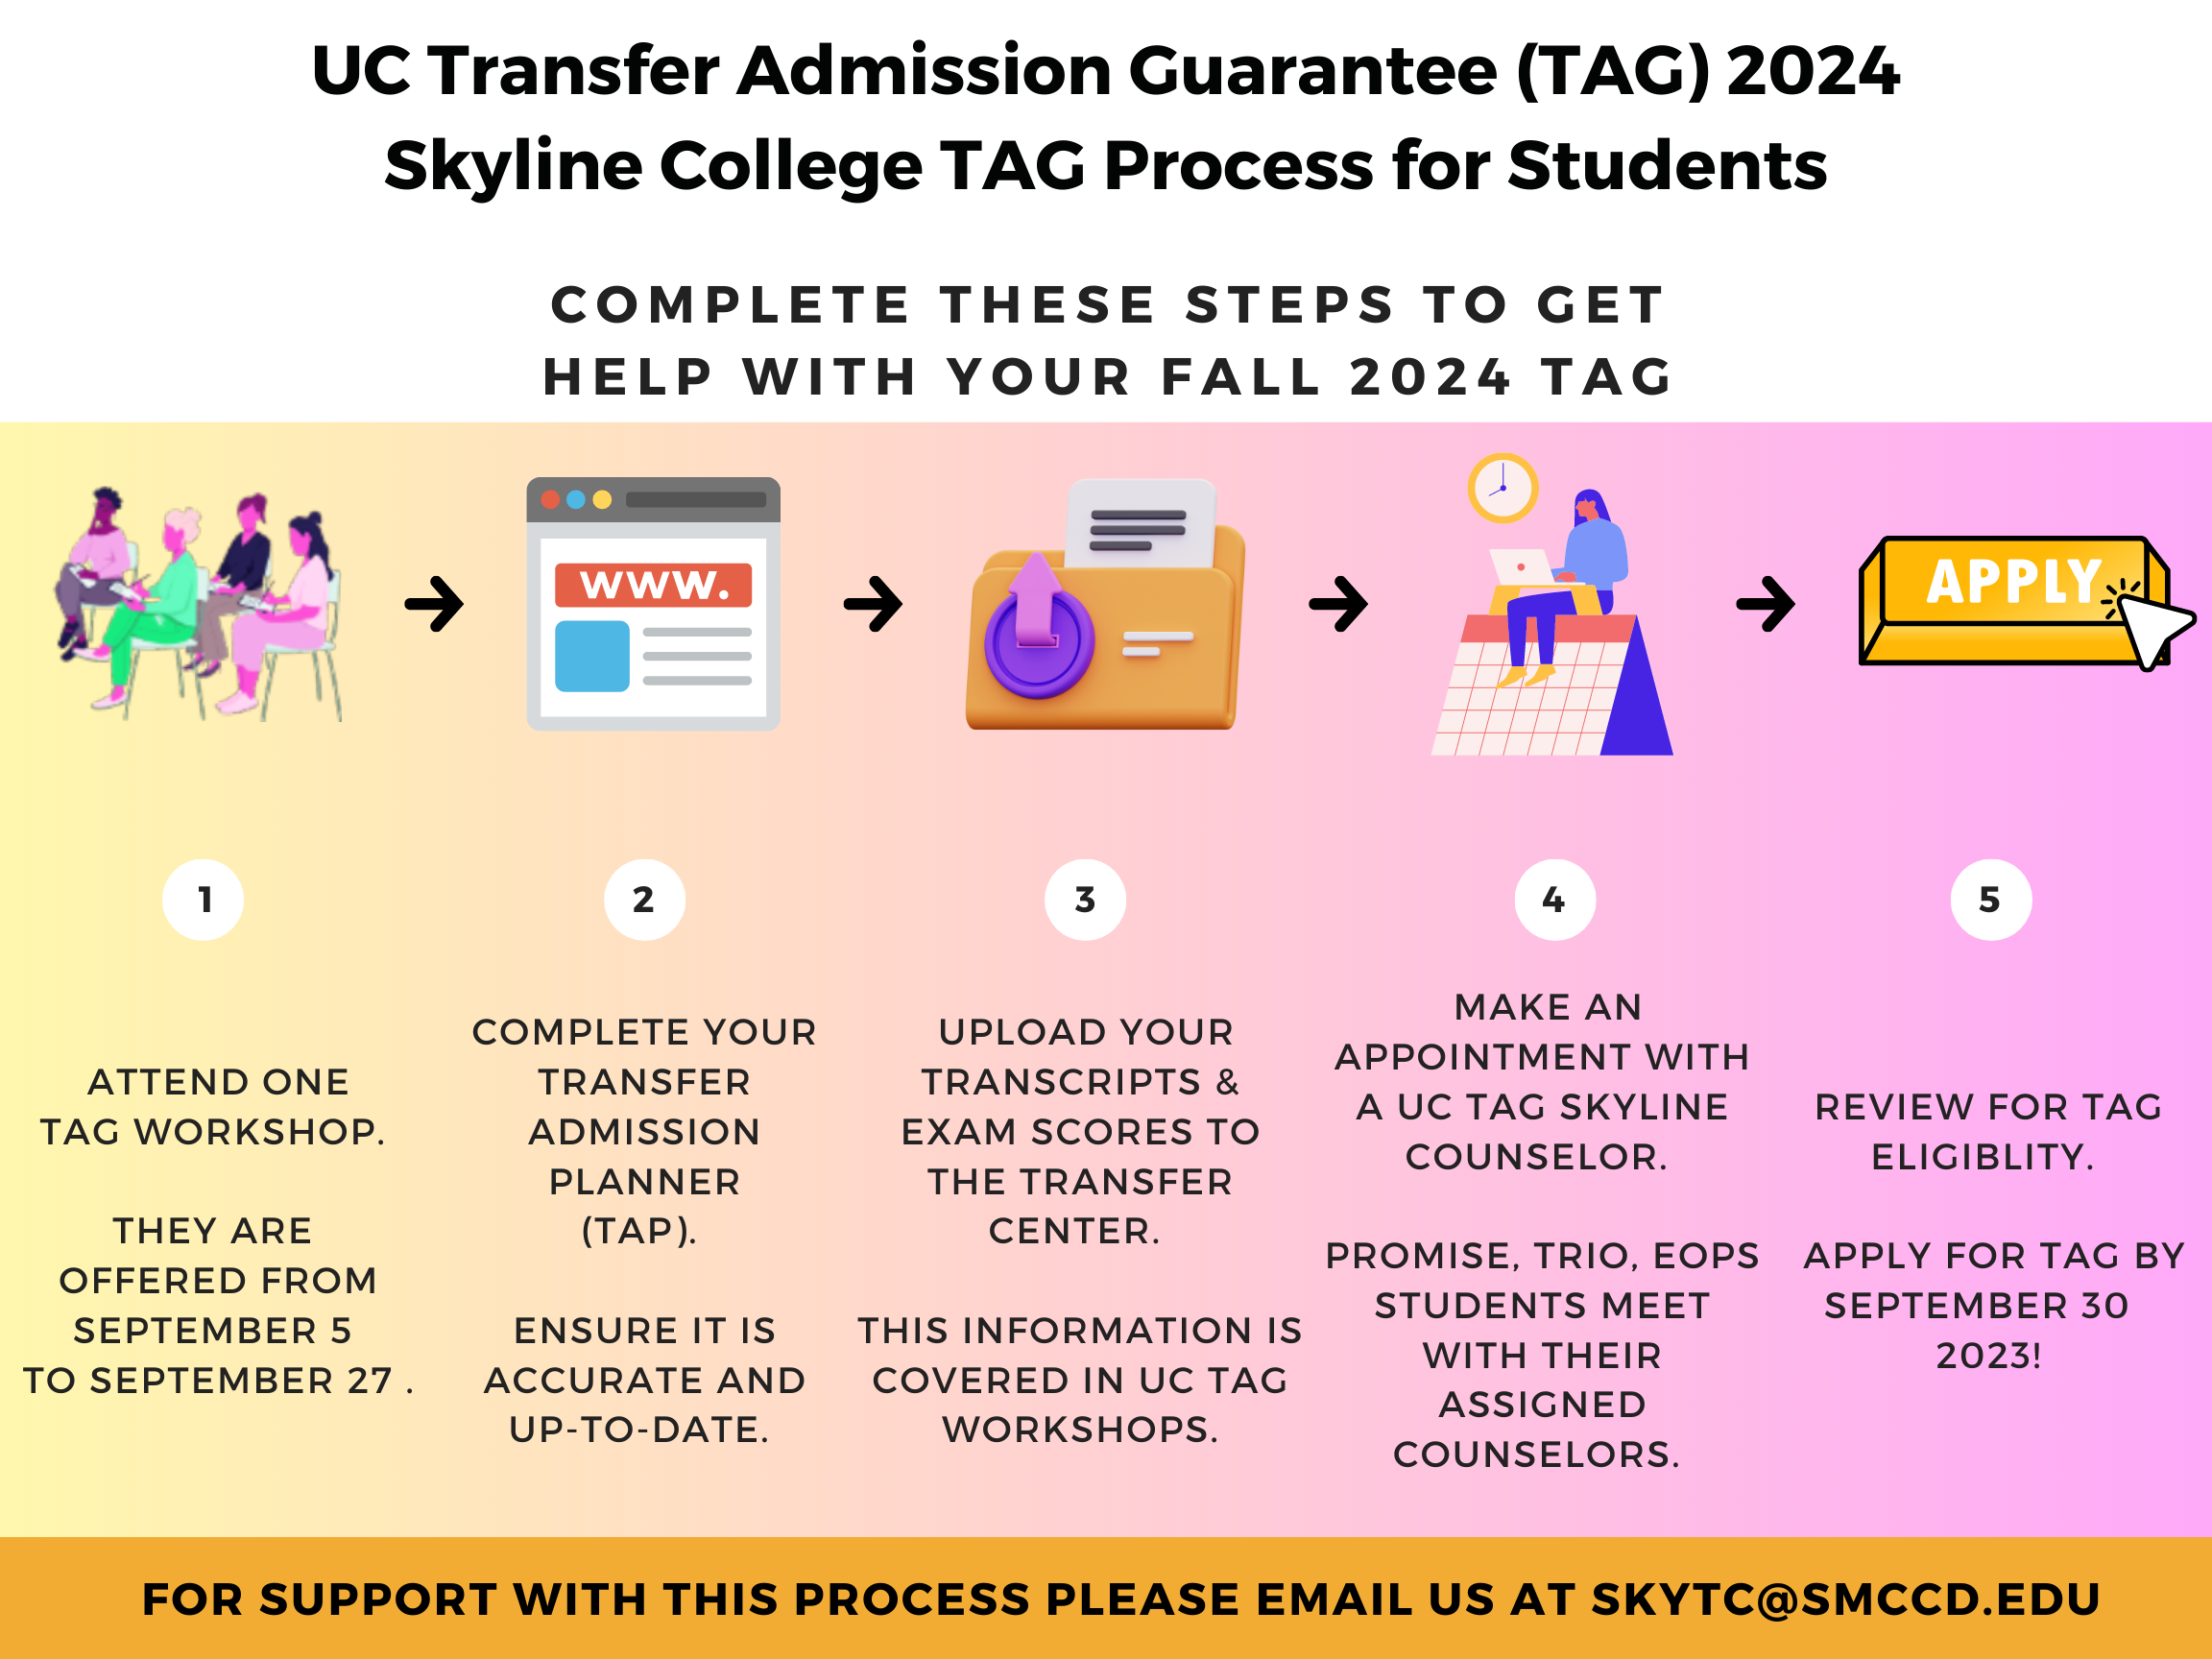 It highlights the five steps to get help with the UC TAG application. The first step is to attend one tag workshop. The second step is complete your TAP account. The third step is to provide the Transfer Center your unofficial and exam score documents. The fourth step is to meet with a counselor. The fifth step is to apply by September 30, 2023! 